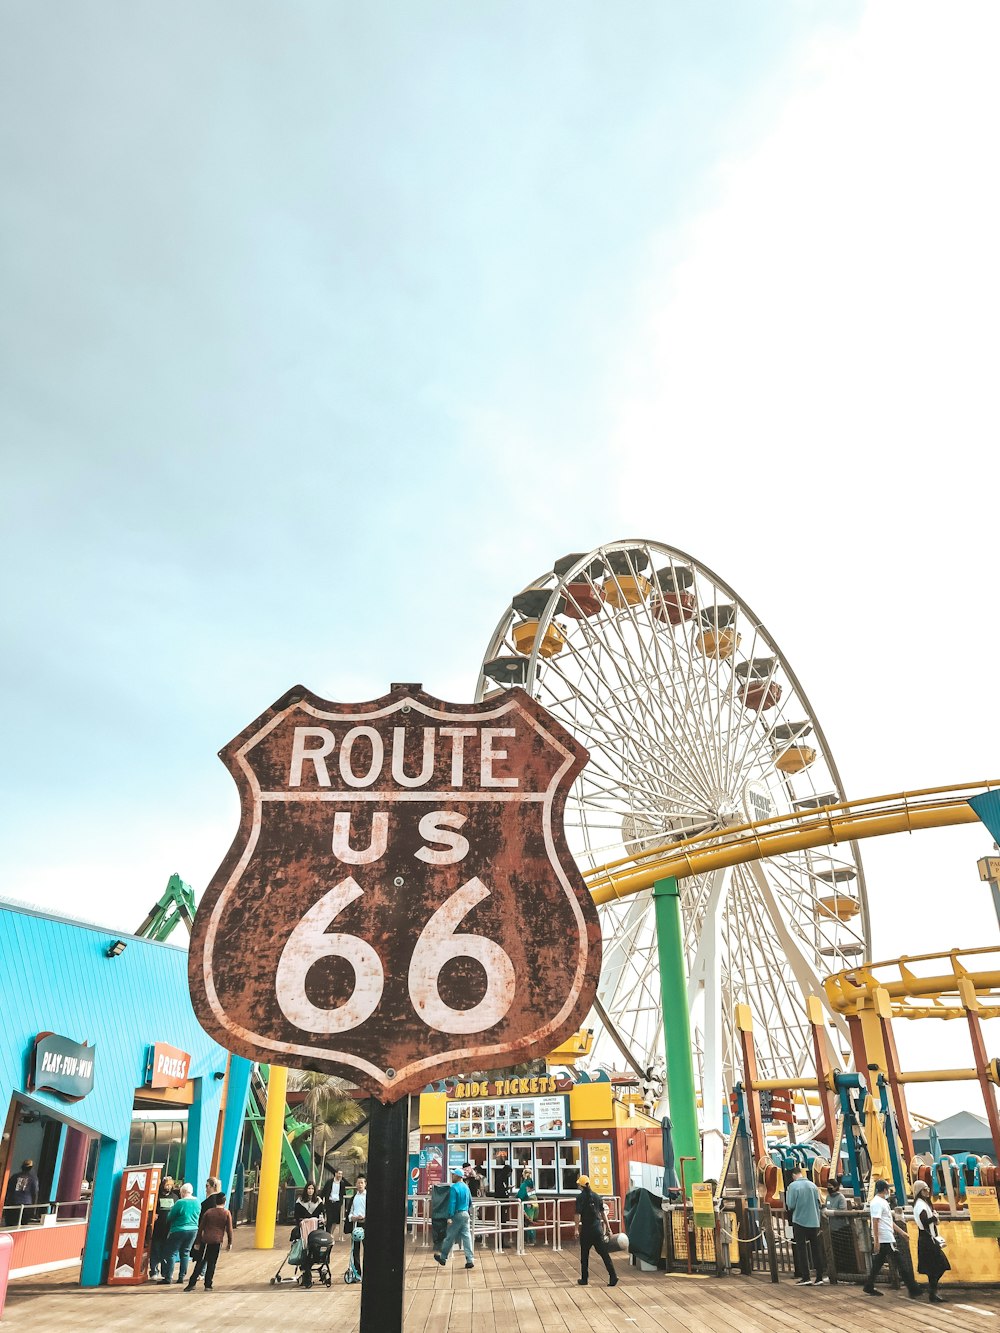 a sign that says route us 66 with a ferris wheel in the background